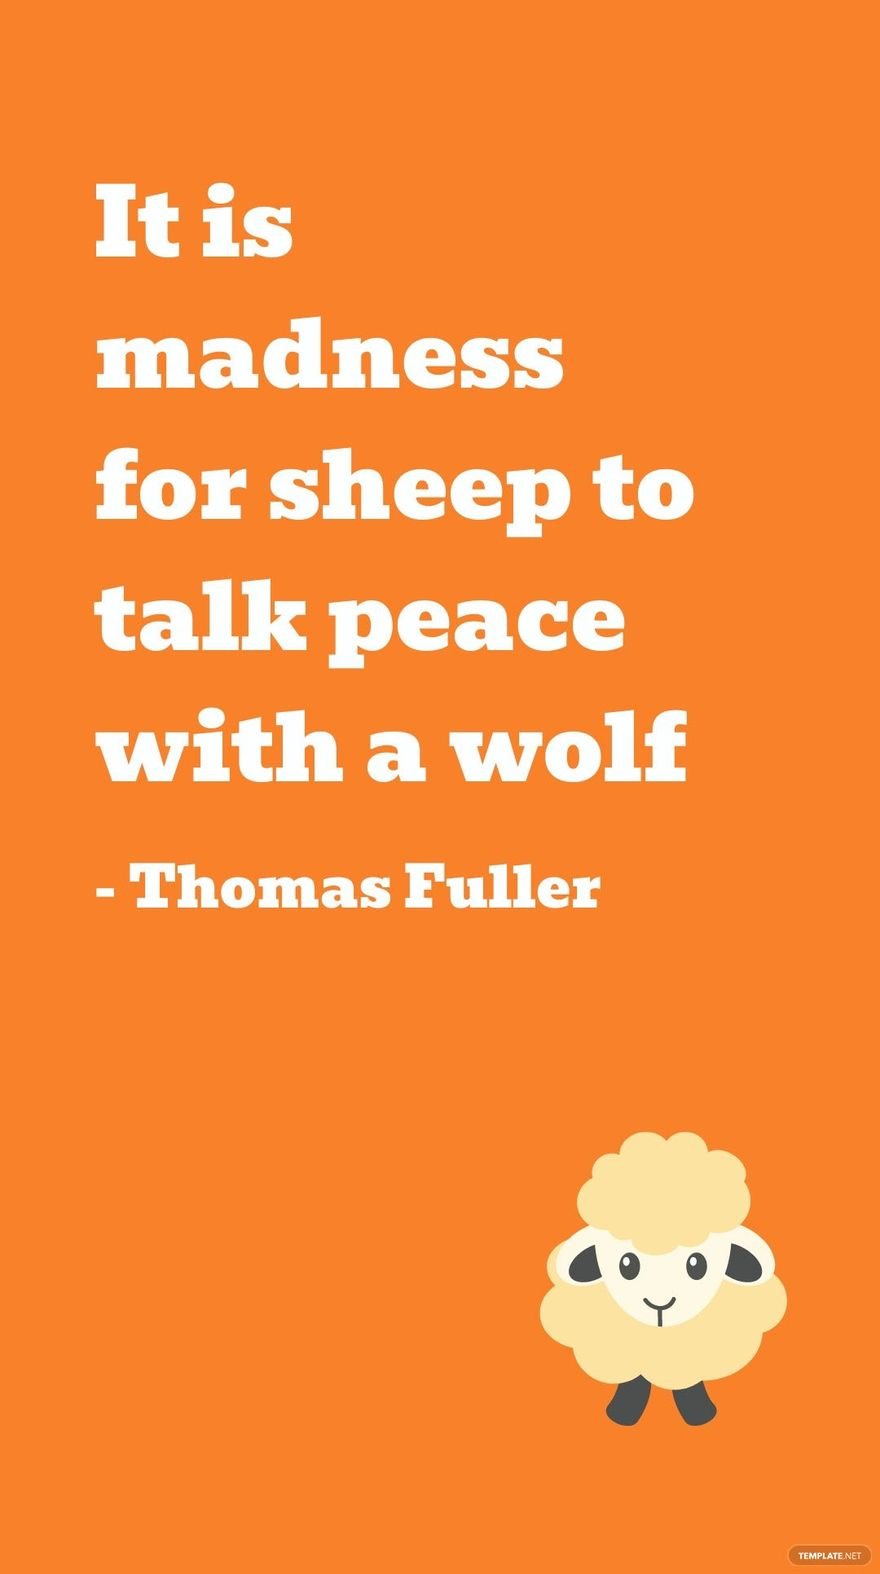 Free Thomas Fuller - It is madness for sheep to talk peace with a wolf in JPG